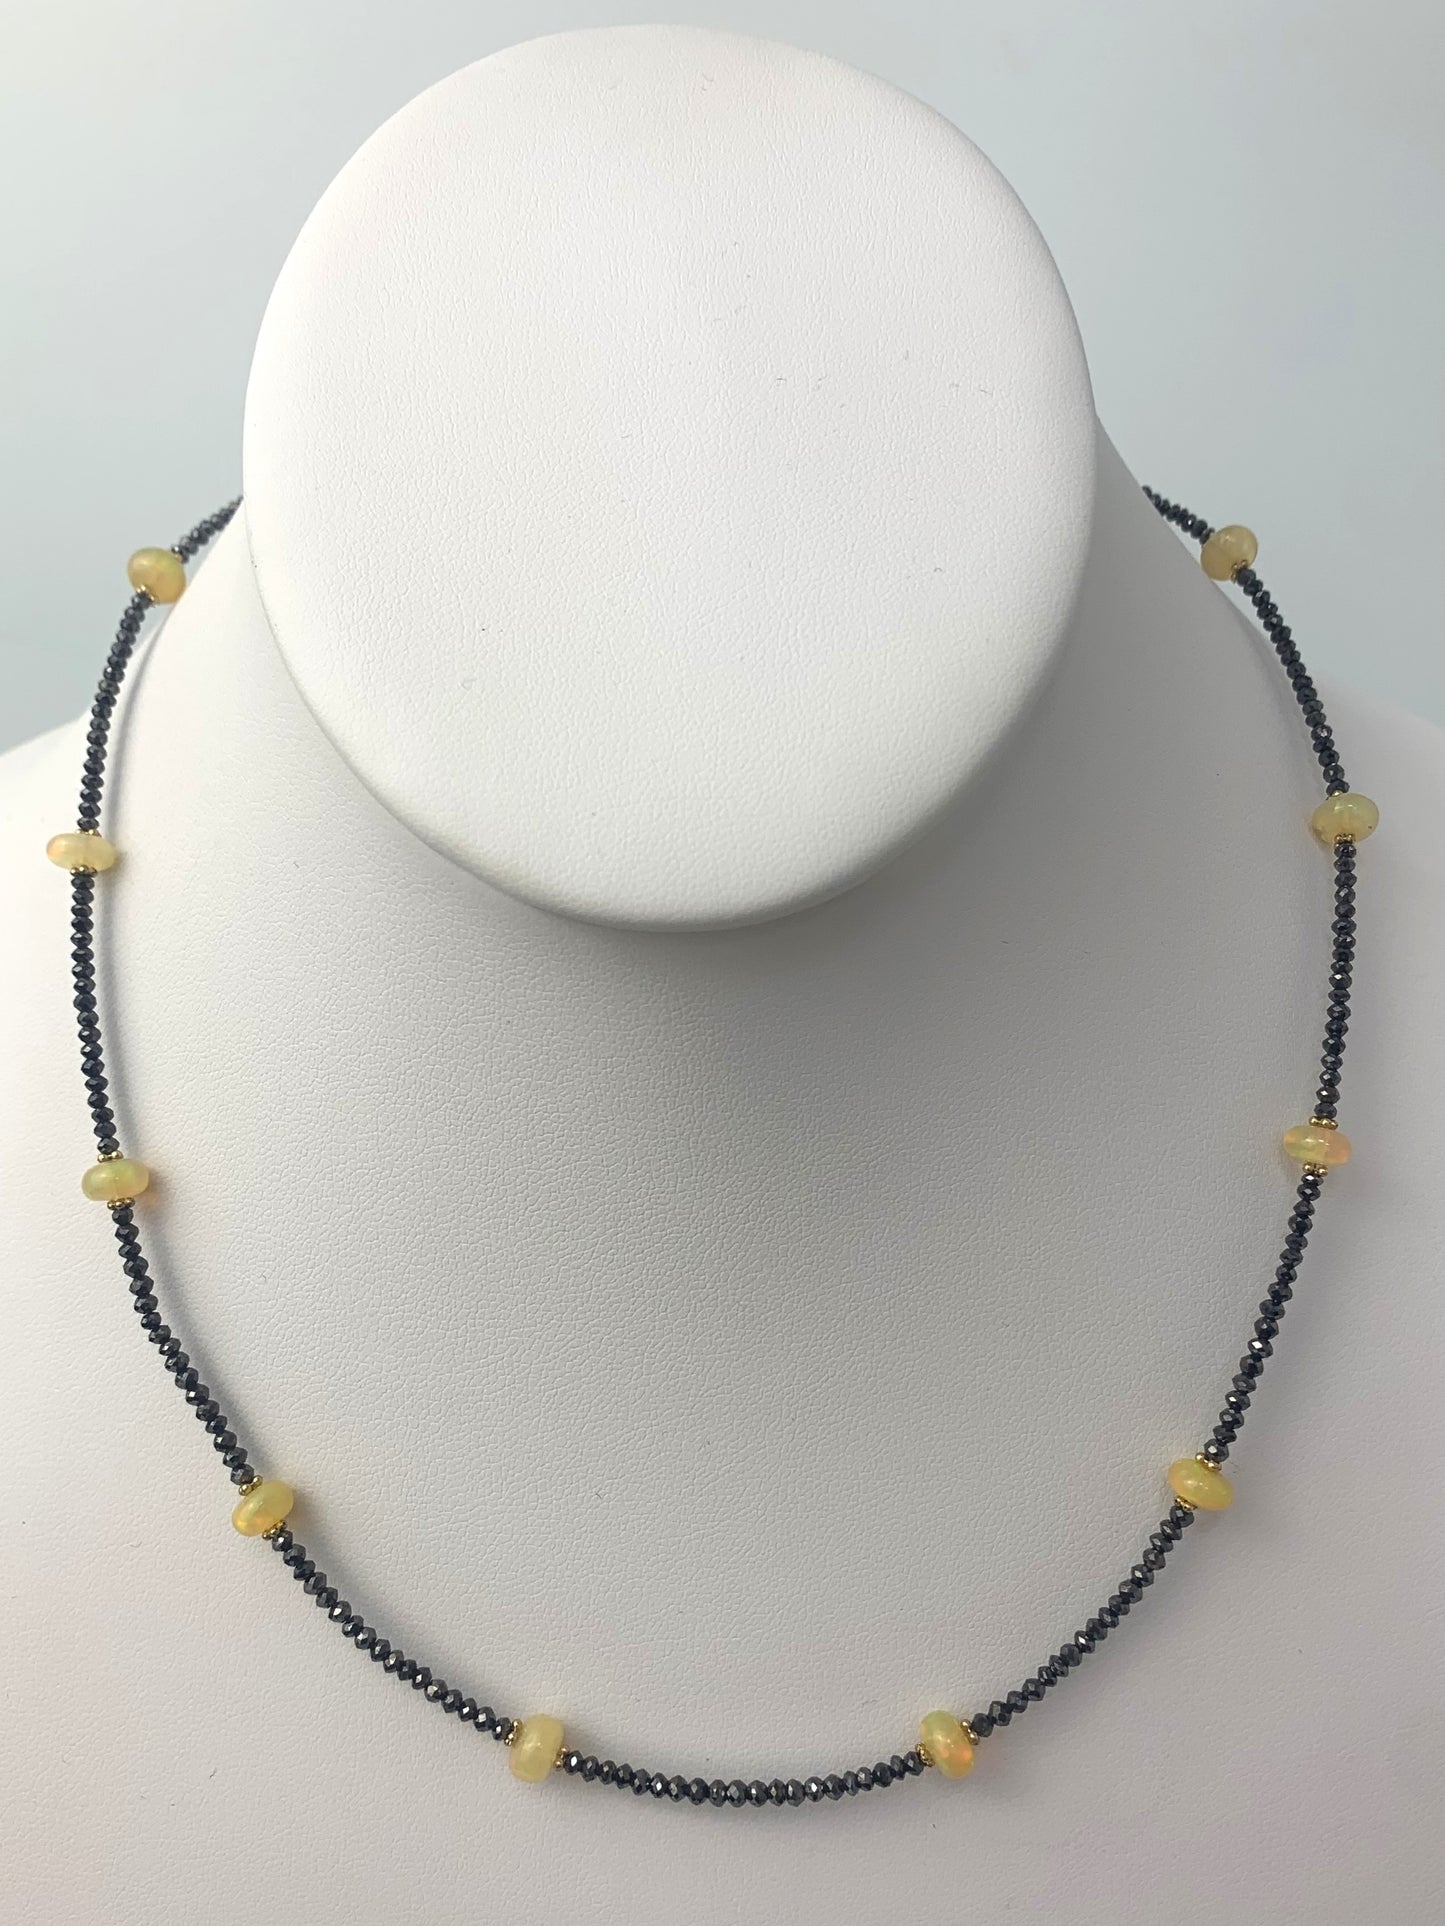 17.5" Black Diamond Necklace with Opal Stations in 14KY - NCK-063-CRDDIAGM14Y-BLKOP-17.5